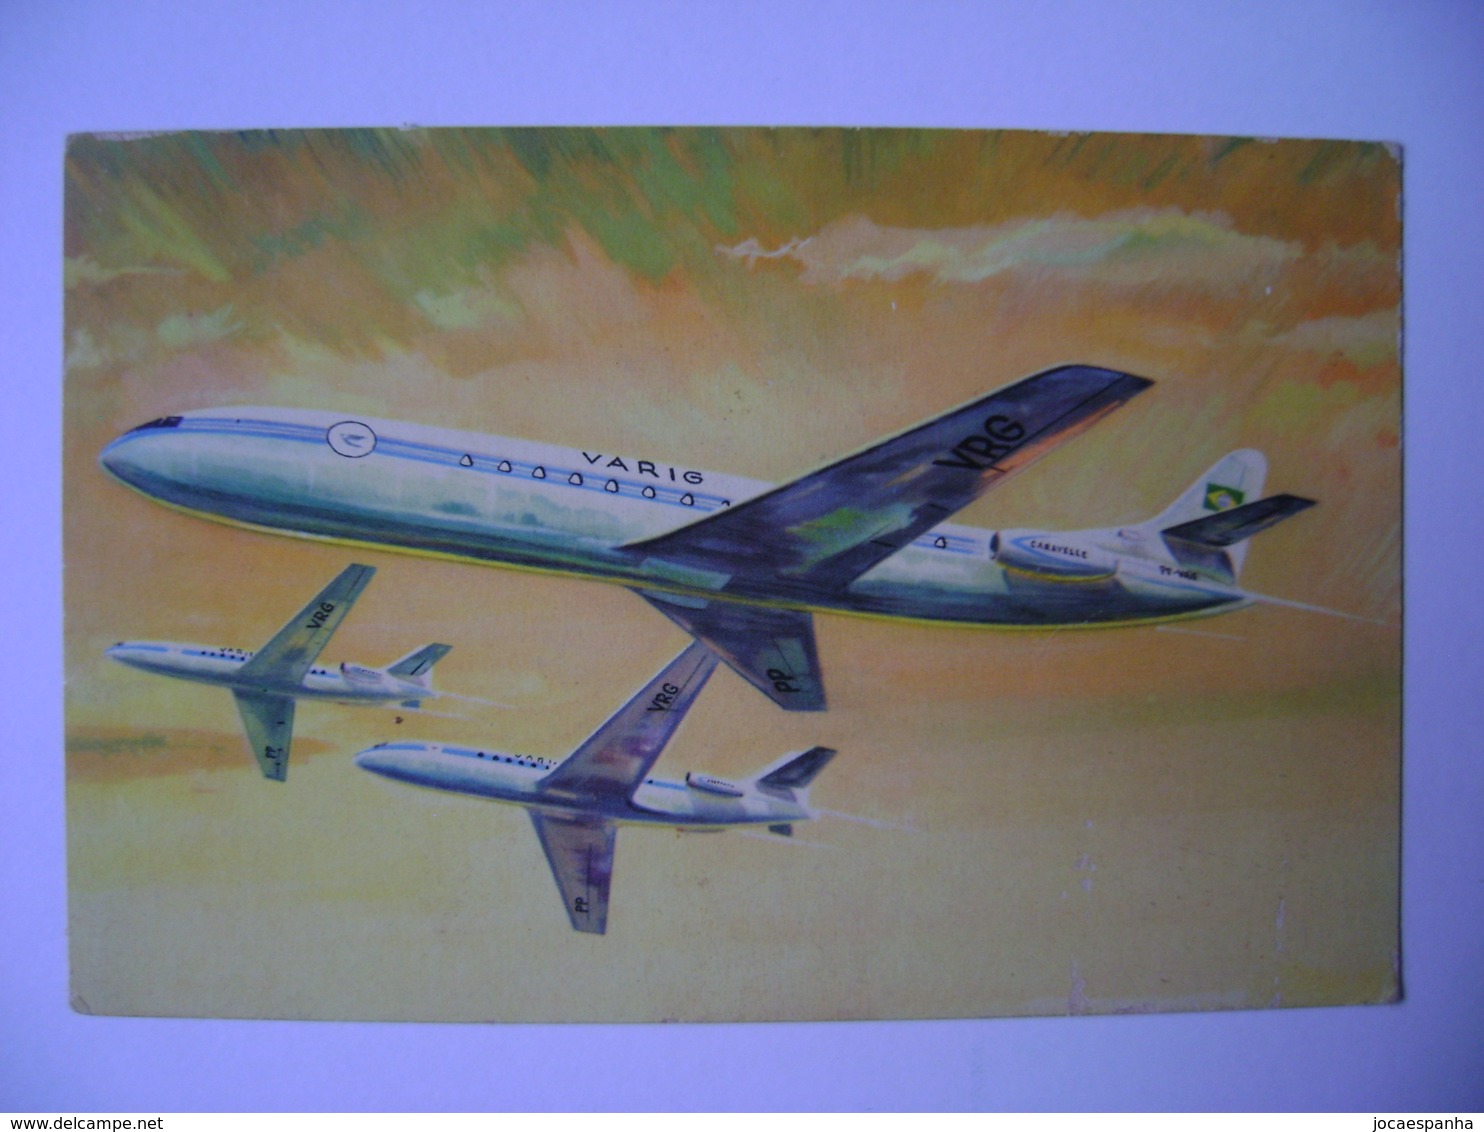 VARIG (BRAZIL) - OFFICIAL POST CARD OF AIR PLANE CARAVELLE IN THE STATE - Dirigeables